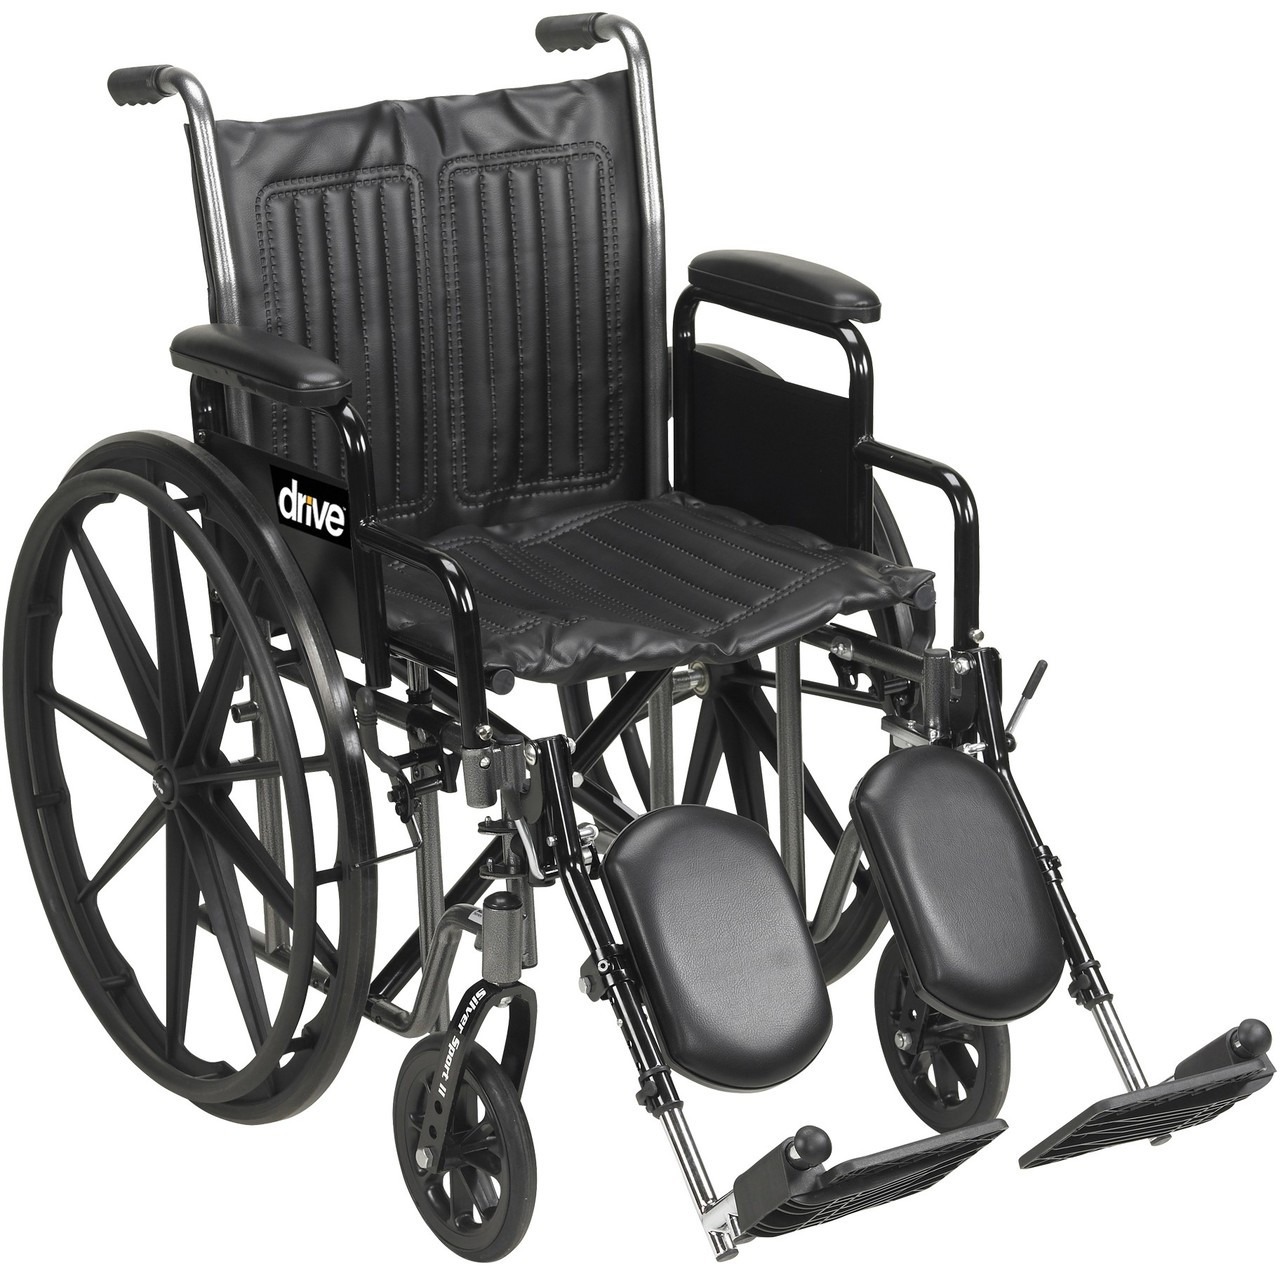 Silver Sport 2 Wheelchair, Detachable Full Arms, Swing away Footrests, 20" Seat (SSP220DFA-SF)